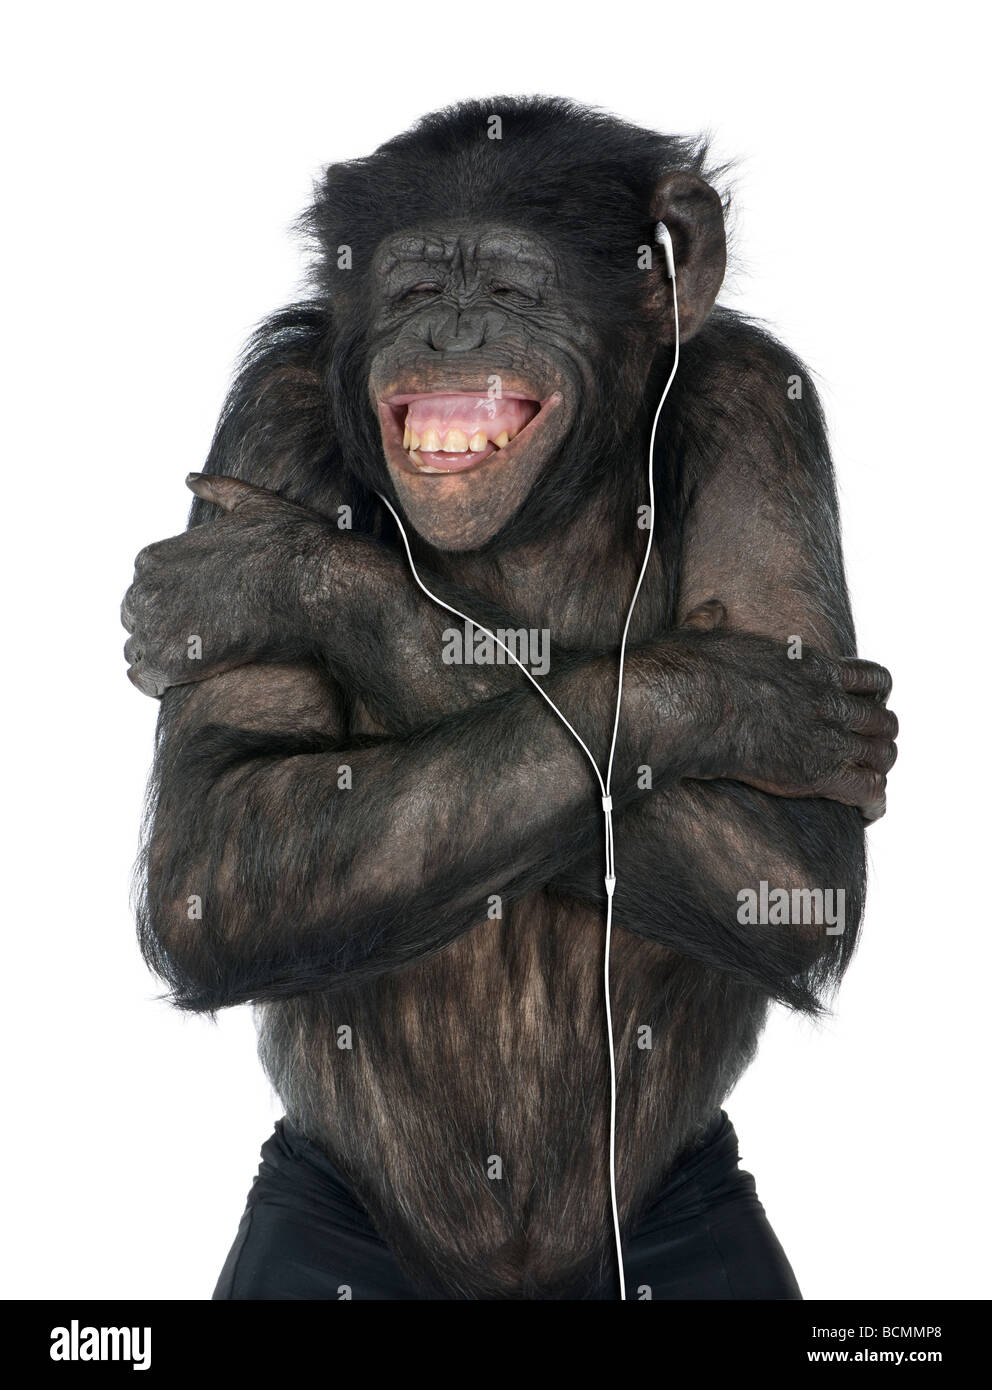 Monkey, Mixed Breed between Chimpanzee and Bonobo, 20 years old, listening to music on headphones in front of white background Stock Photo